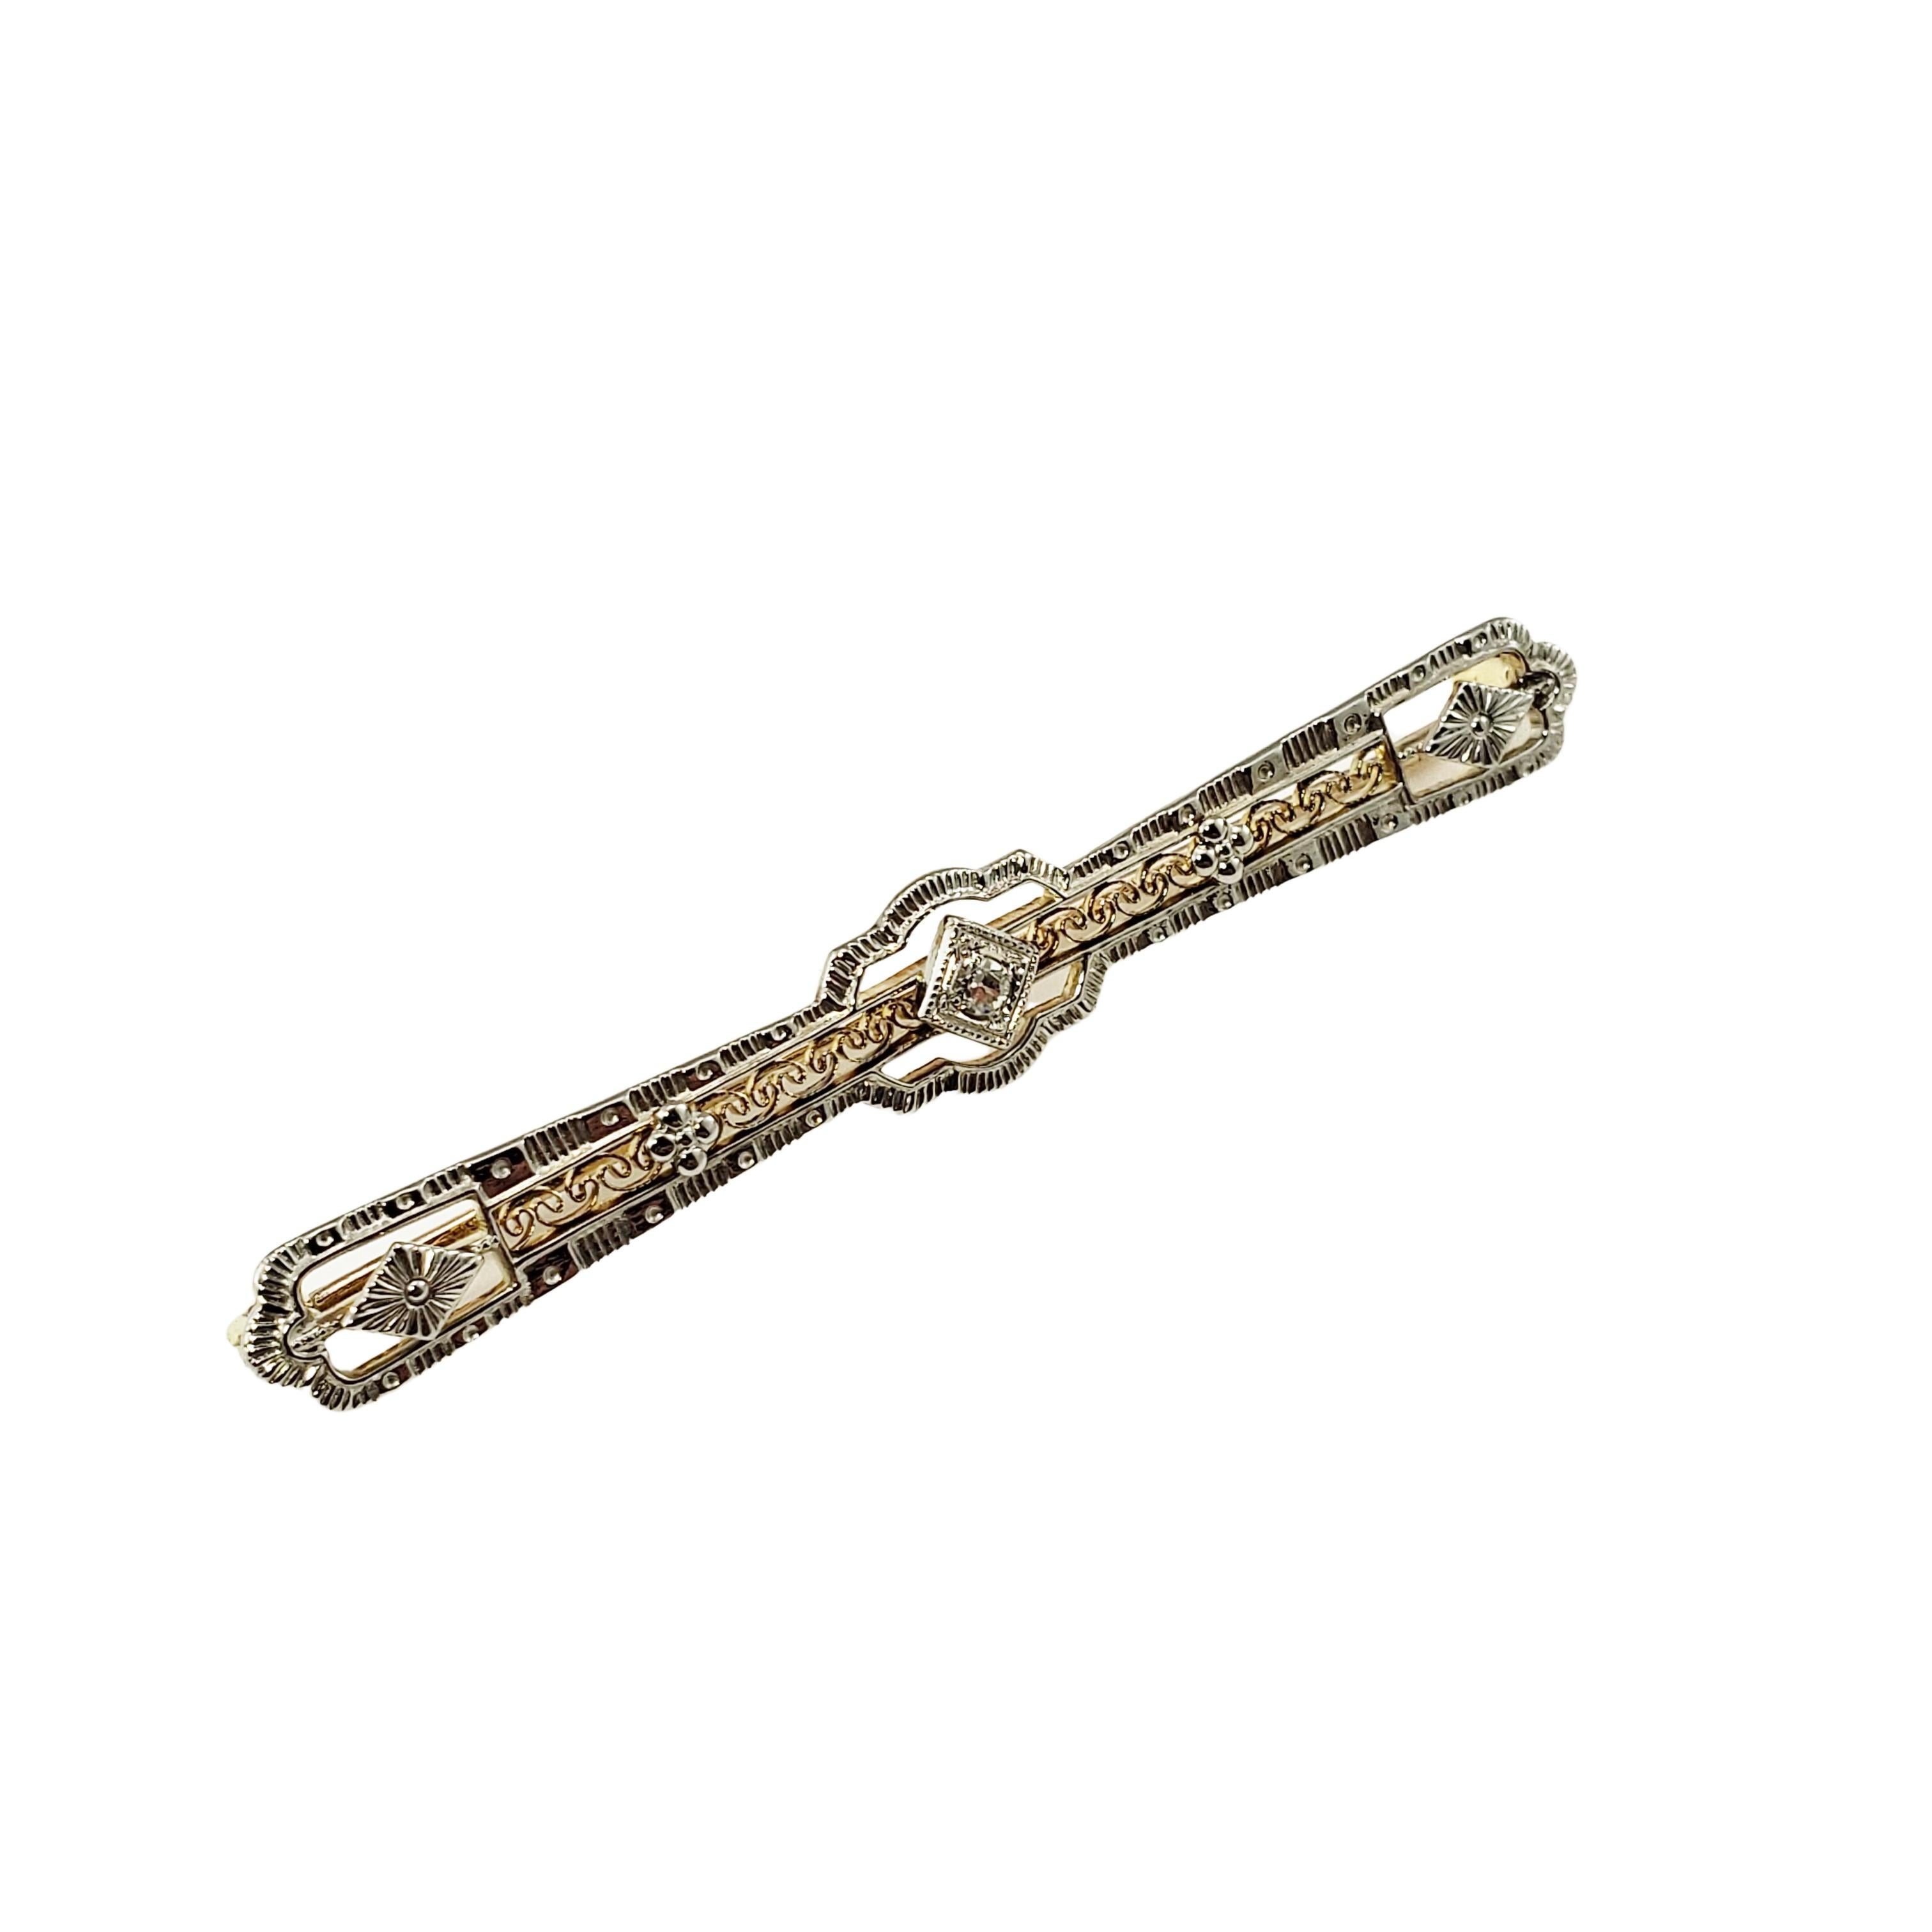 14 Karat White/Yellow Gold and Diamond Bar Brooch/Pin-

This elegant brooch features one round single cut diamond set in beautifully detailed 14K white and yellow gold.  

Approximate total diamond weight: .03 ct.

Diamond color: K

Diamond clarity: